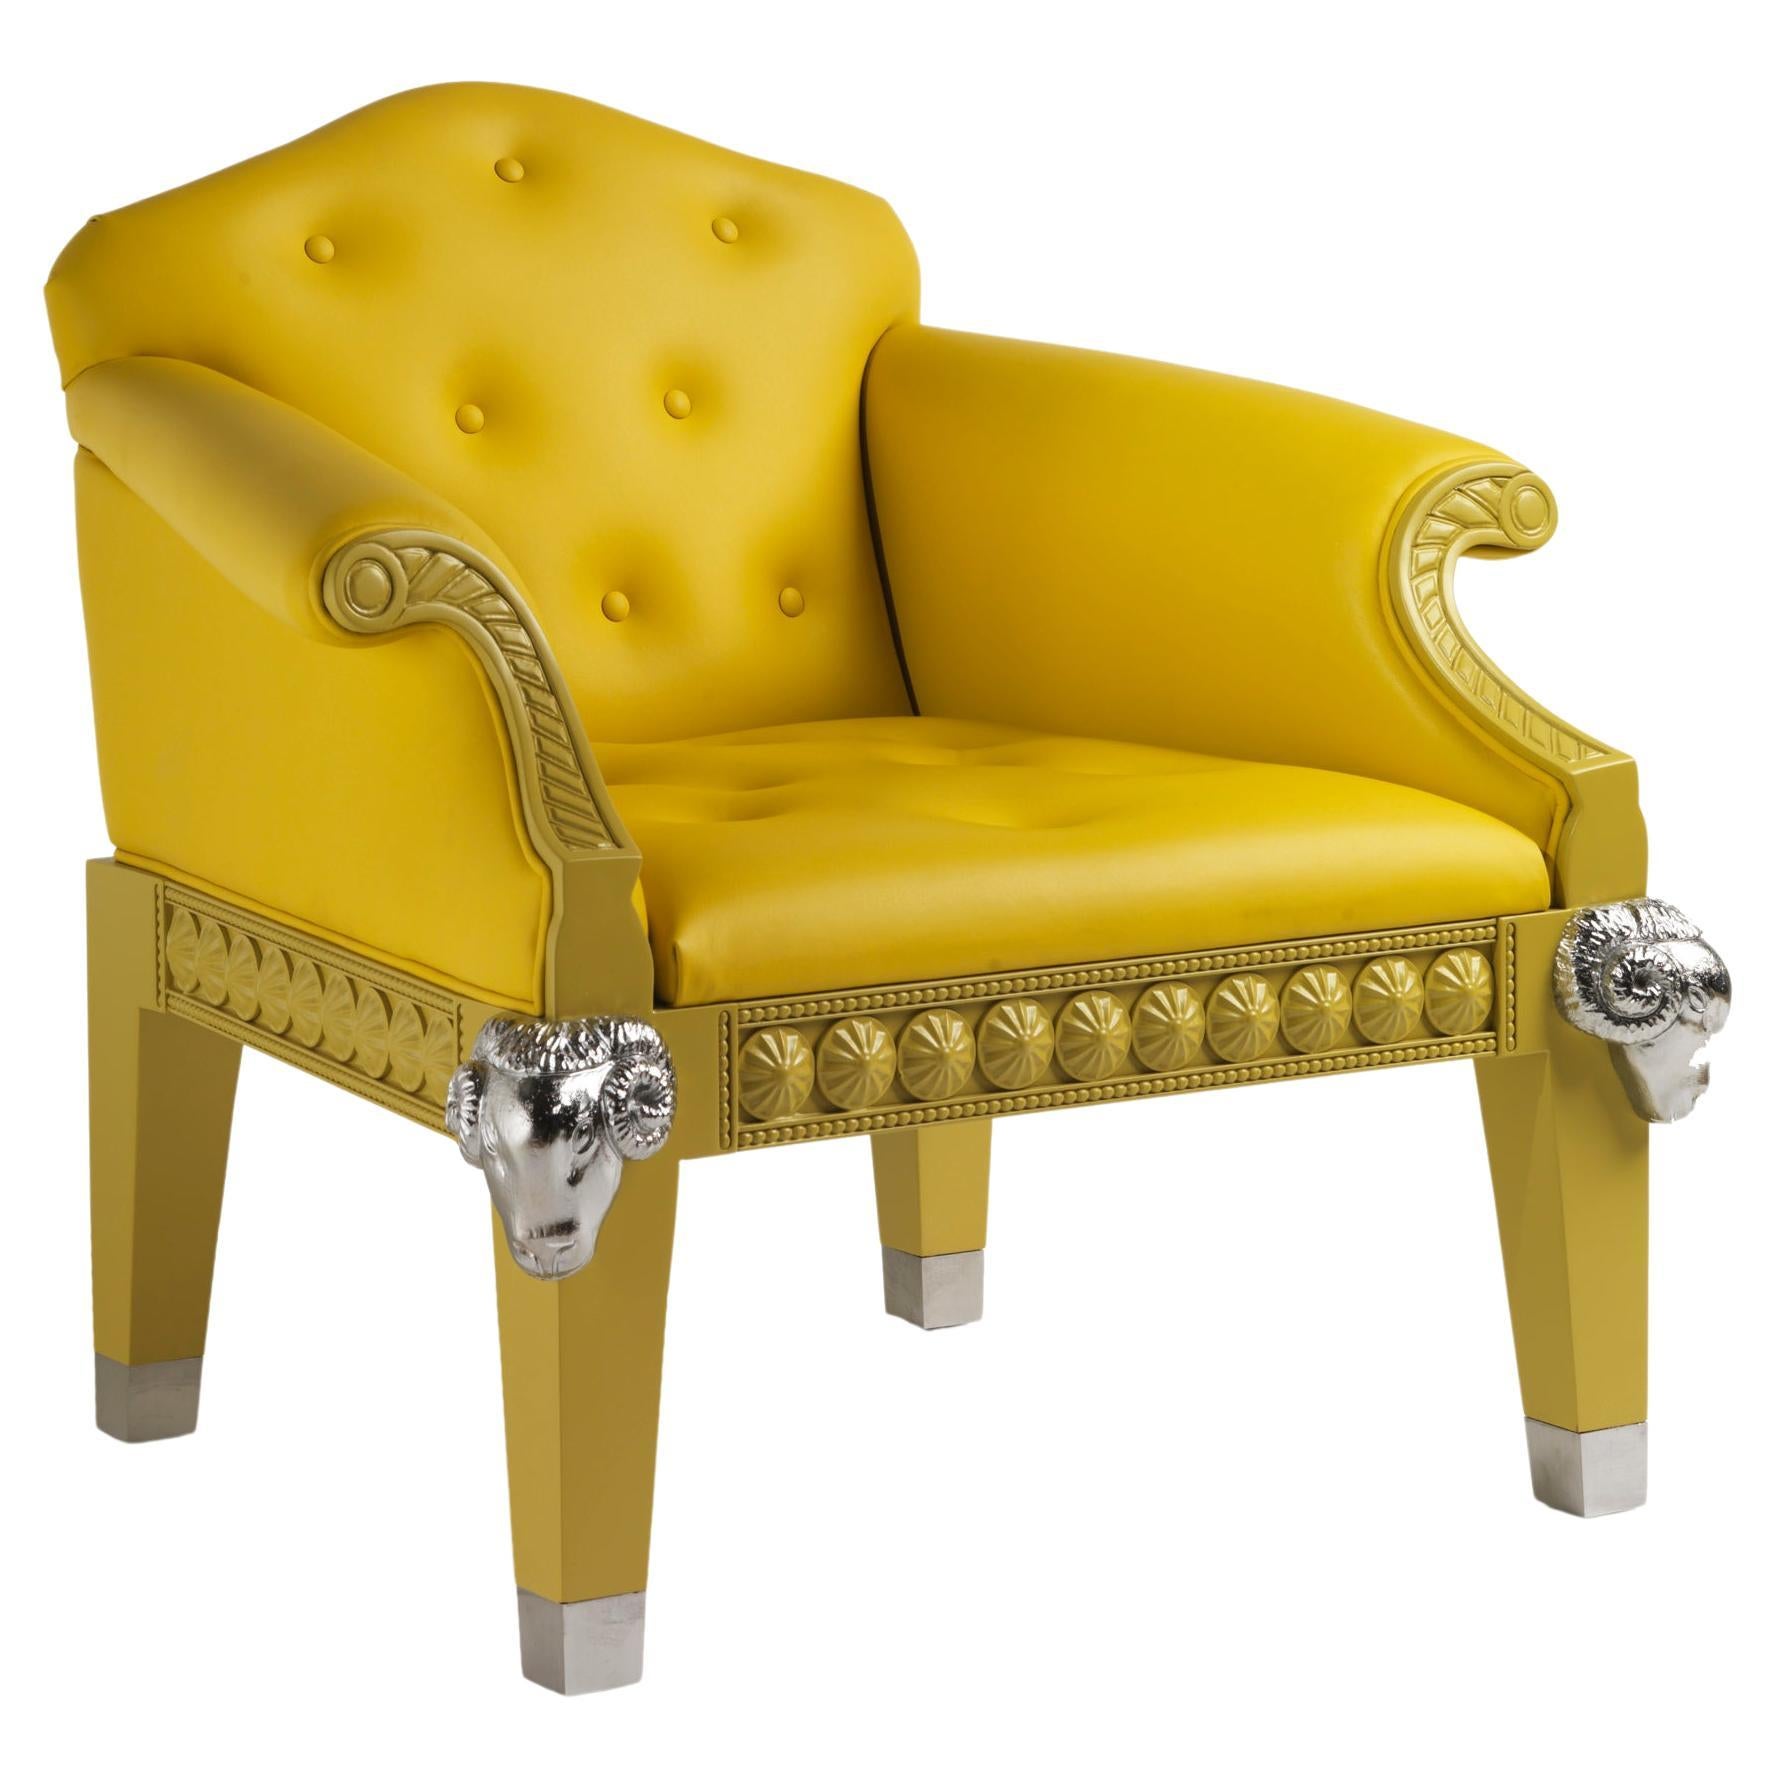 Formidable Beast Uhpholstered Yellow Armchair with Chrome Rams and Seat Buttons For Sale